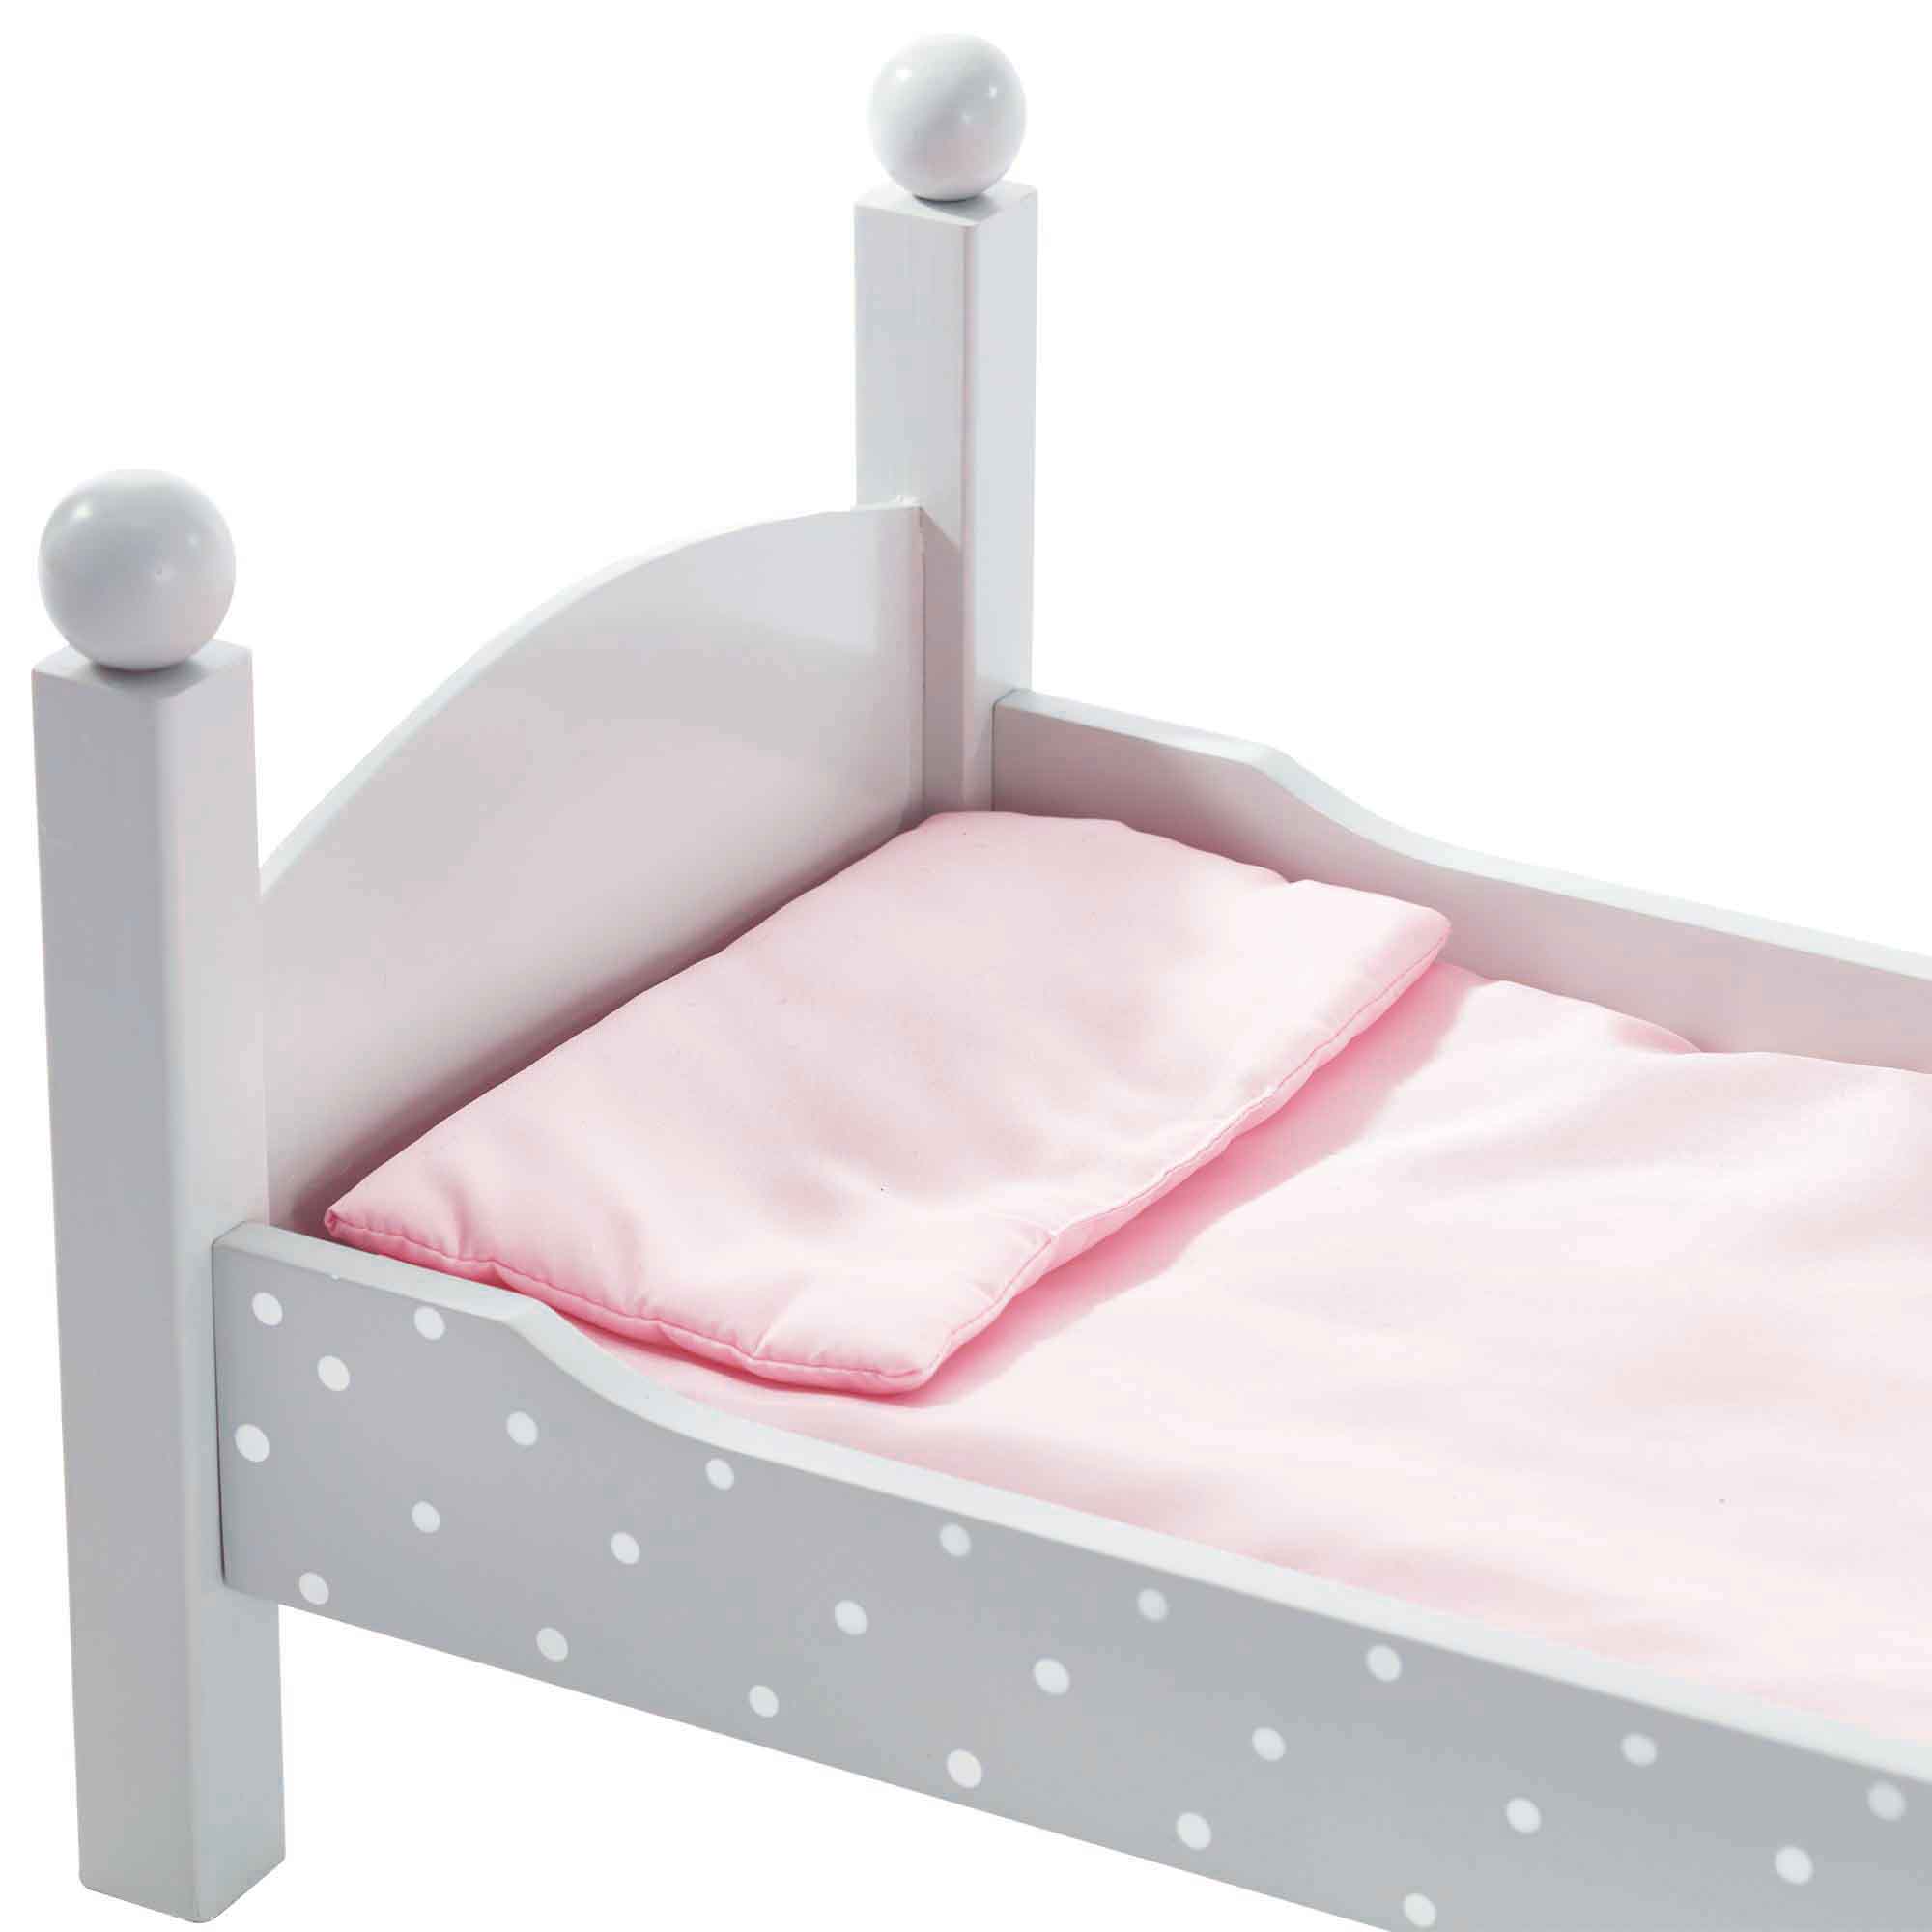 Olivia's Little World Polka Dots Princess Double Bunk Bed for 18" Dolls, Gray